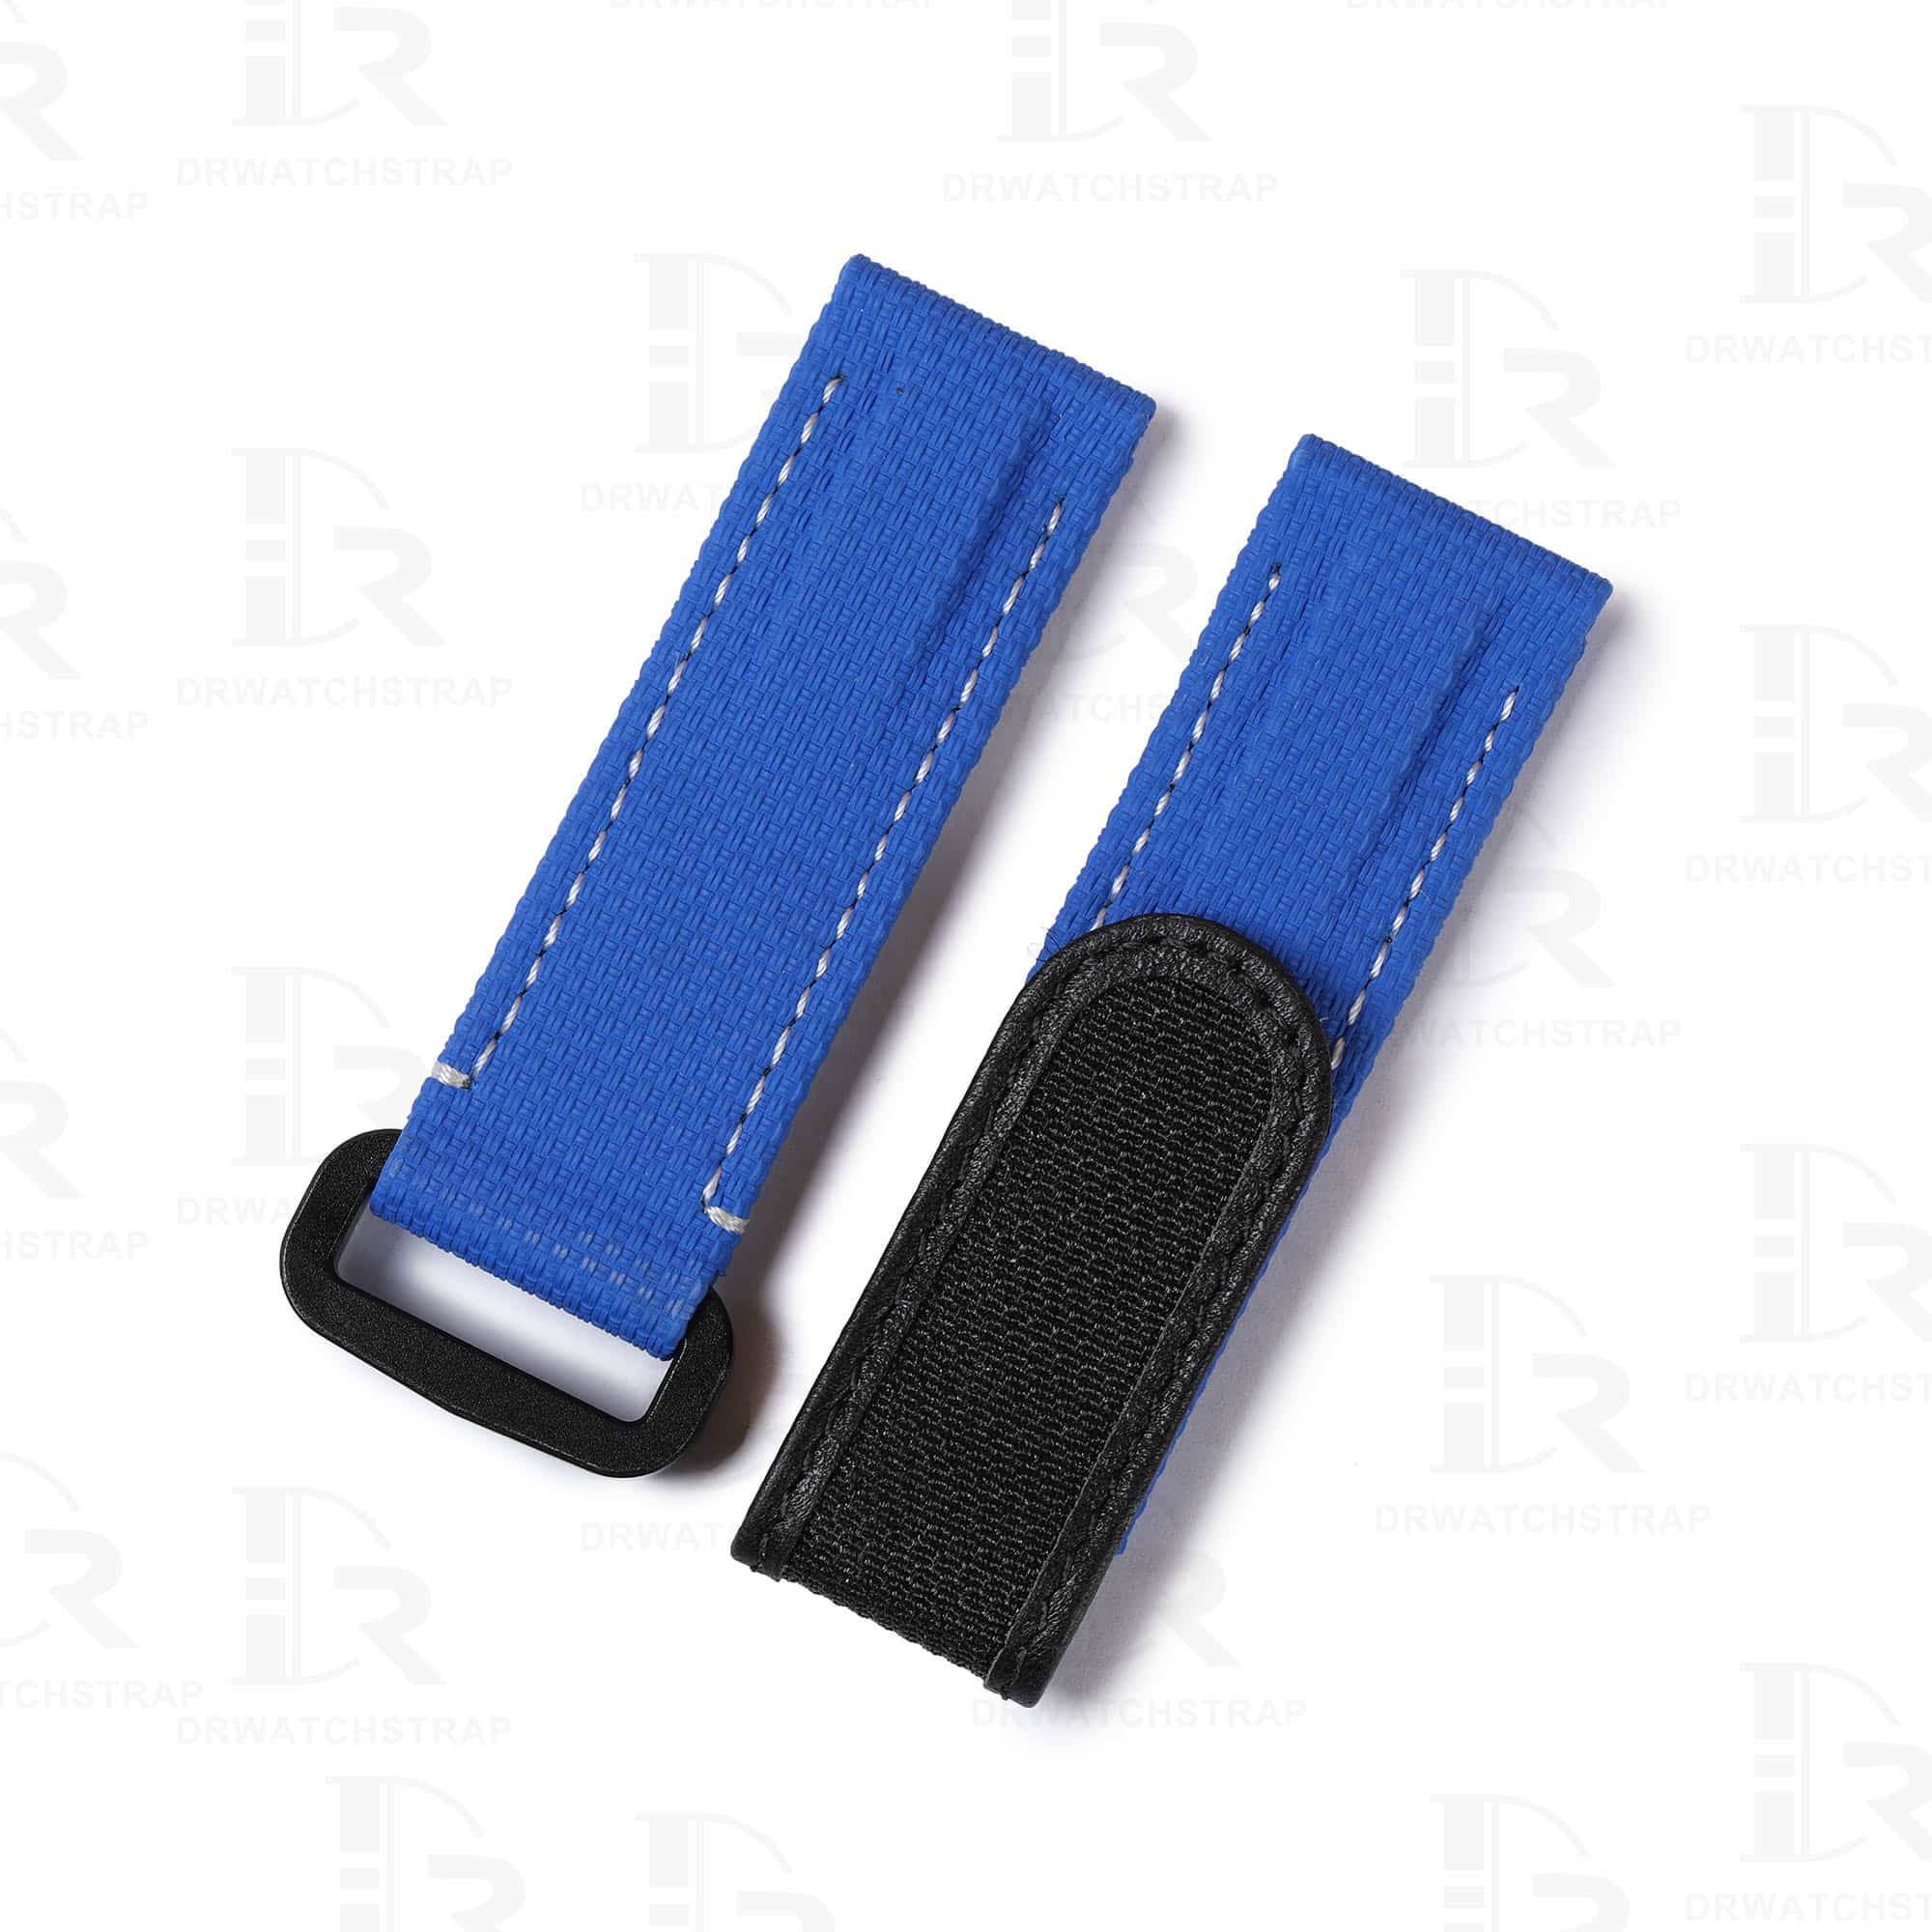 Custom best quality canvas blue replacement velcro rubber watch strap and watch band online for Rolex, Blancpain, Omega, and any other man or women watches with flat ends watch bands replacement from DRwatchstrap at a low price